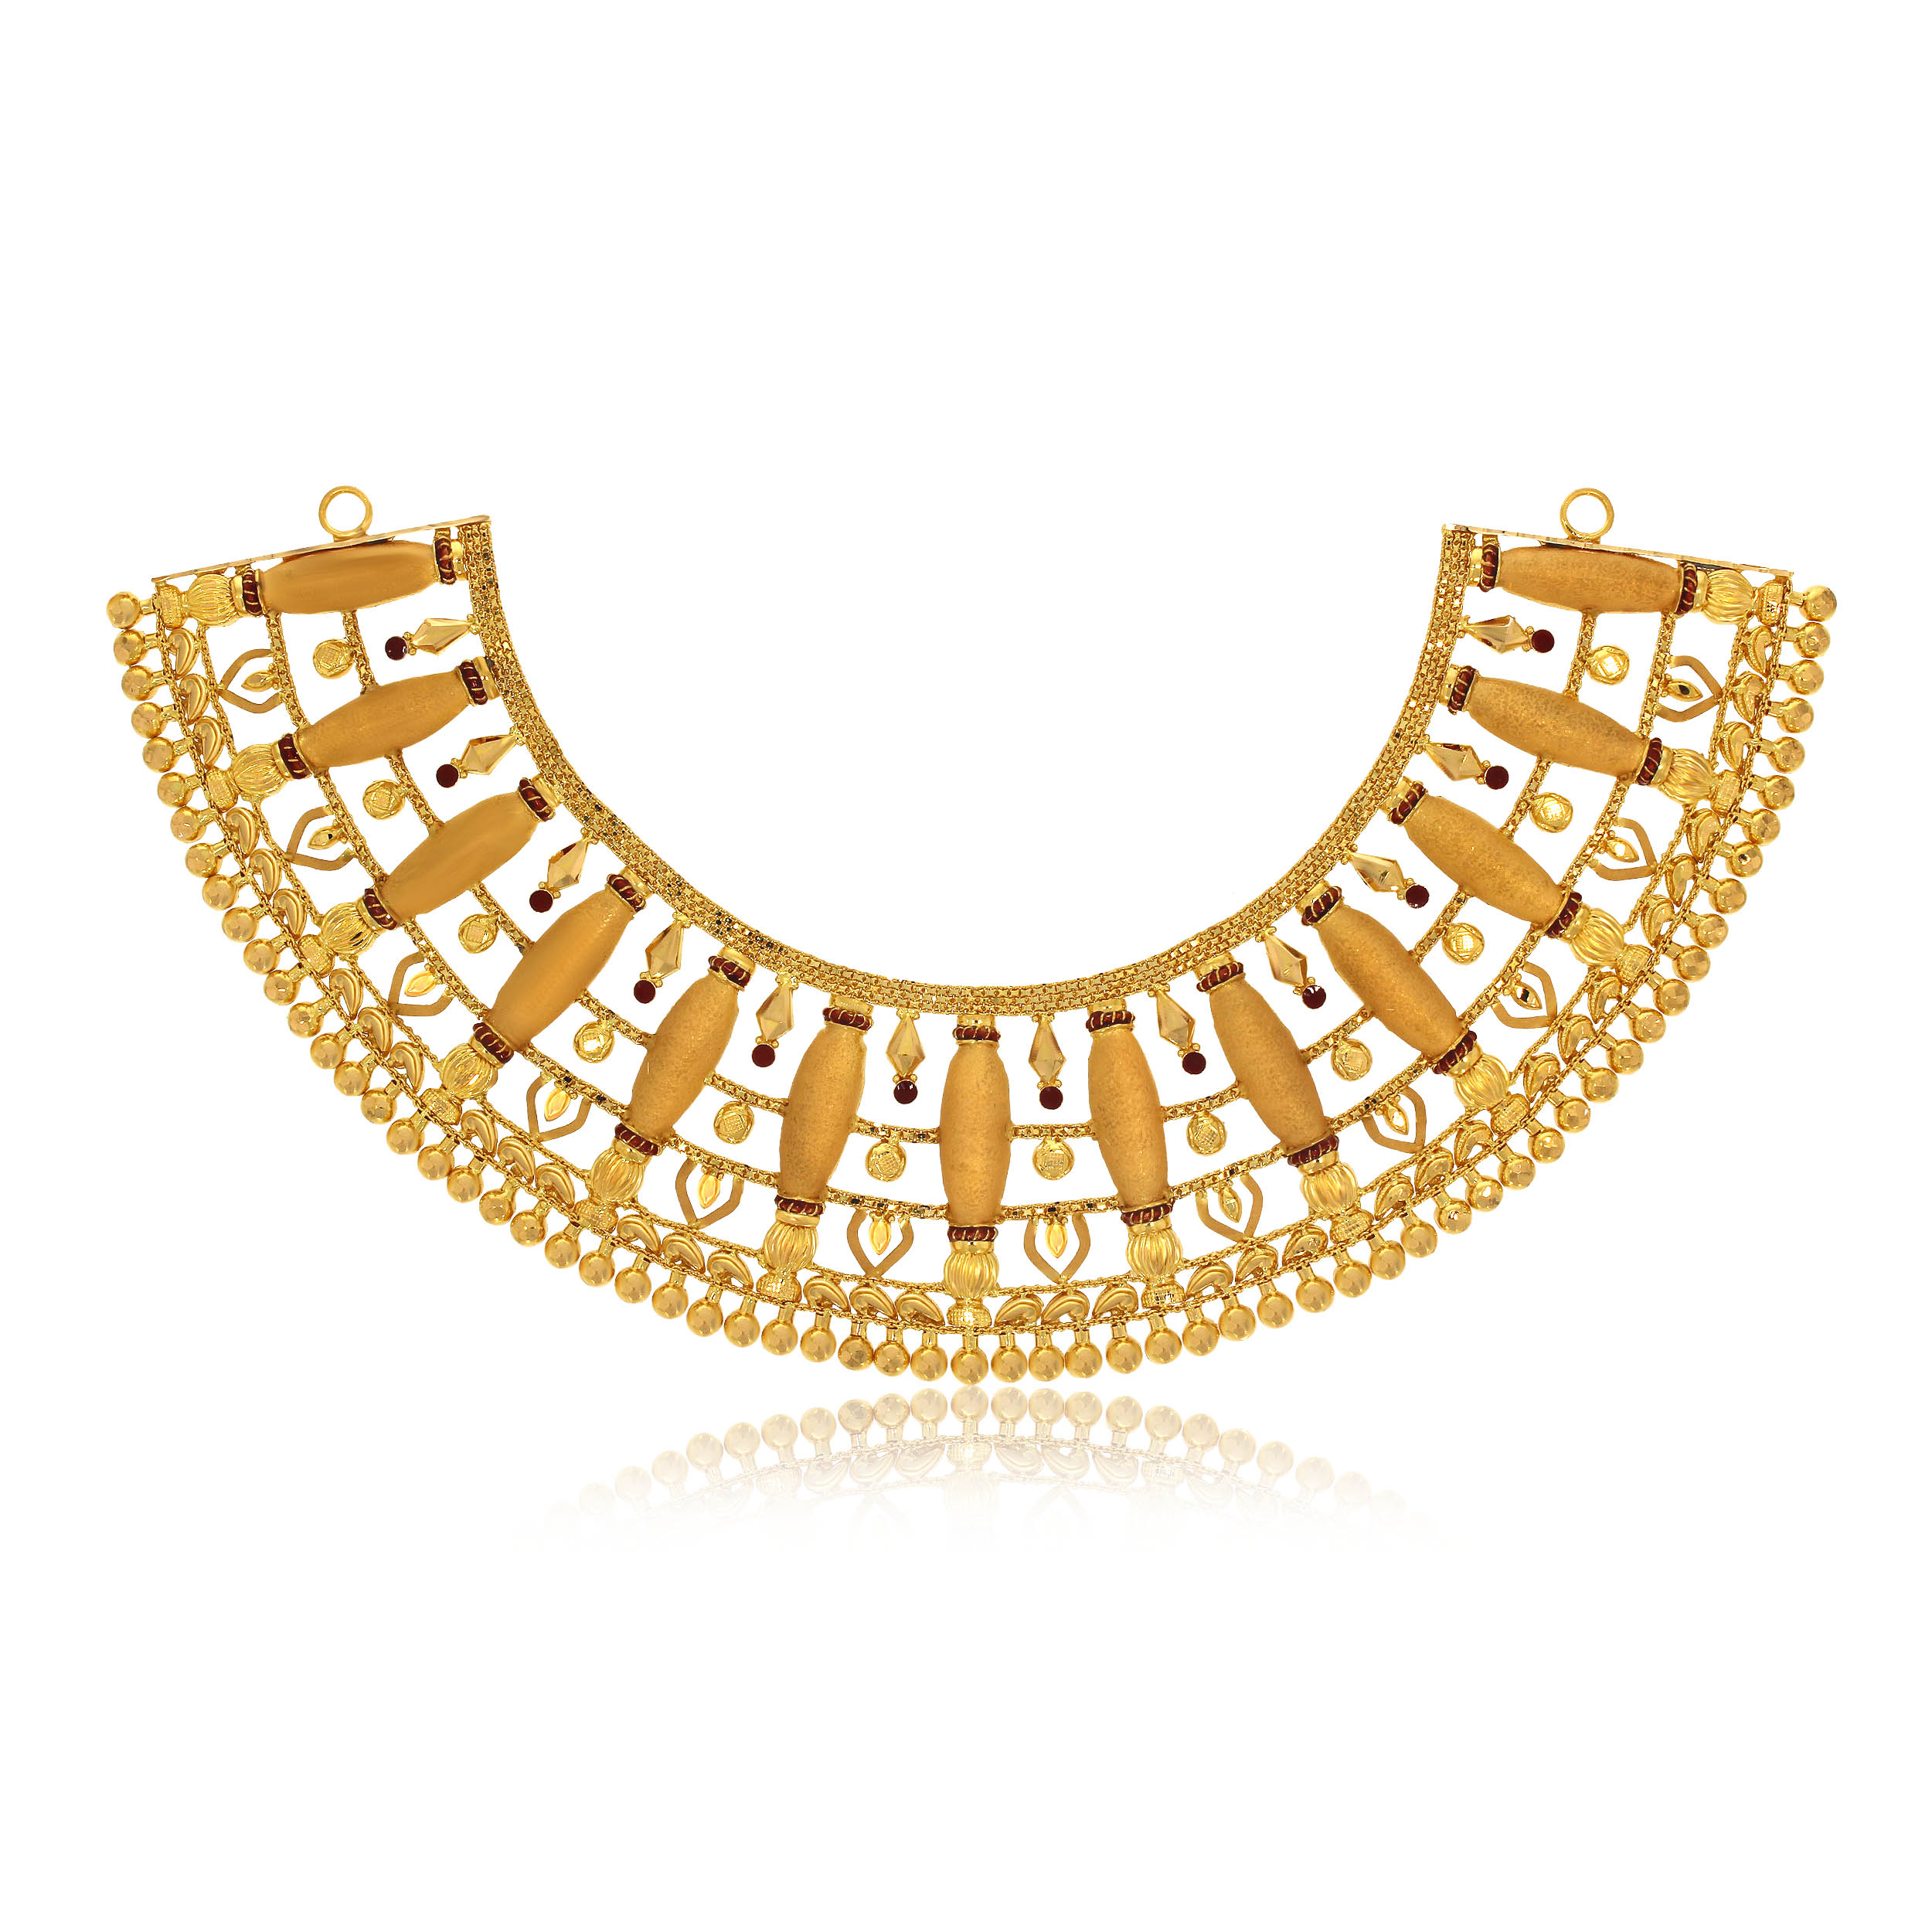 ROMI  AABI JEWELS 22CT BIS HALLMARK GOLD  NECKLACE FOR WOMAN